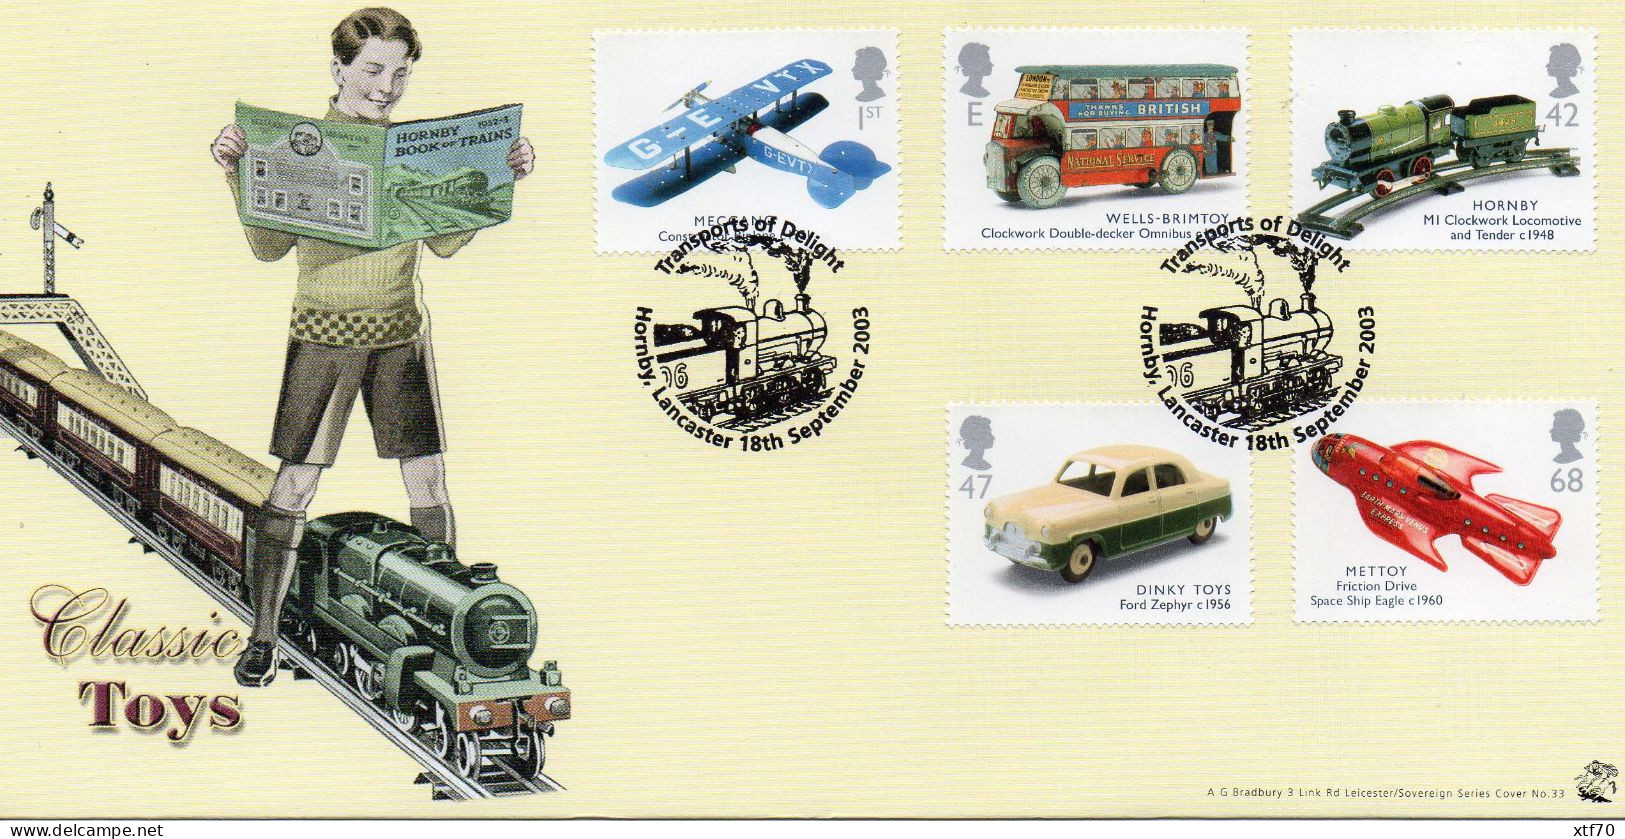 GREAT BRITAIN 2003 Transport Of Delights FDC - 2001-2010 Decimal Issues